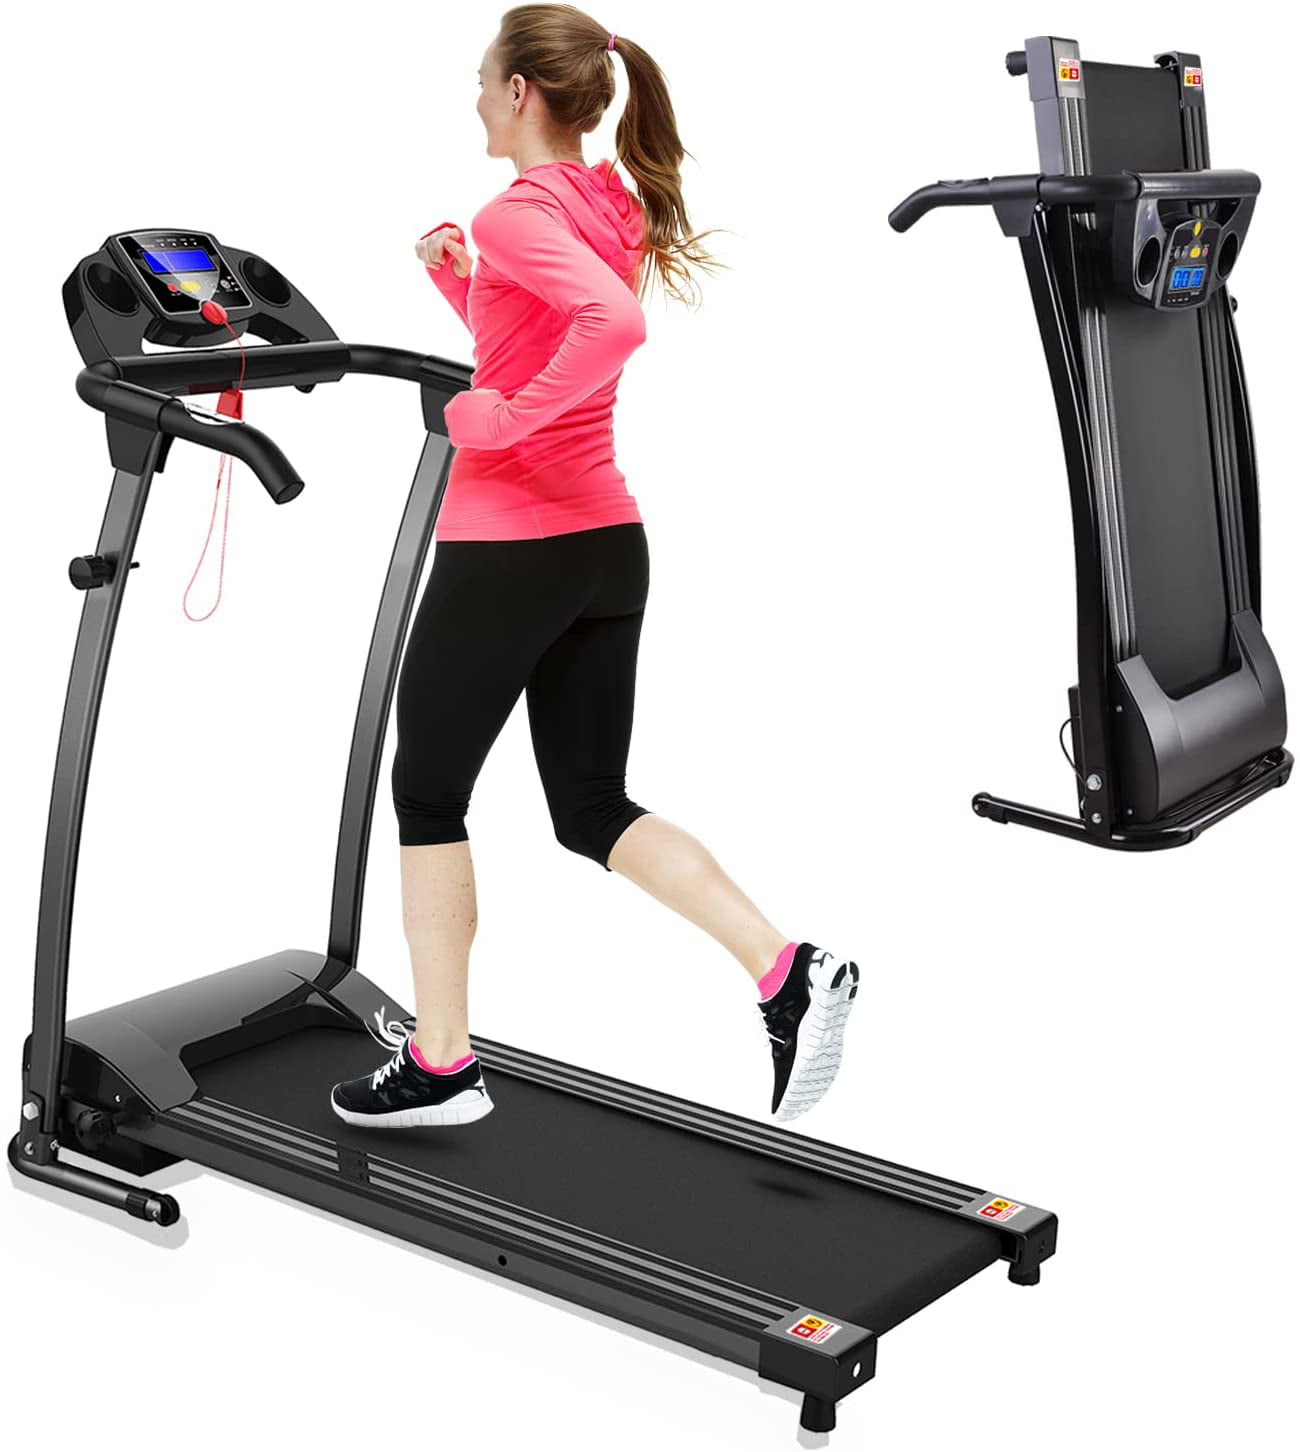 Details about   Treadmill 2.5 HP Electric Motorized Power Folding Running Machine Home Gym LCD 